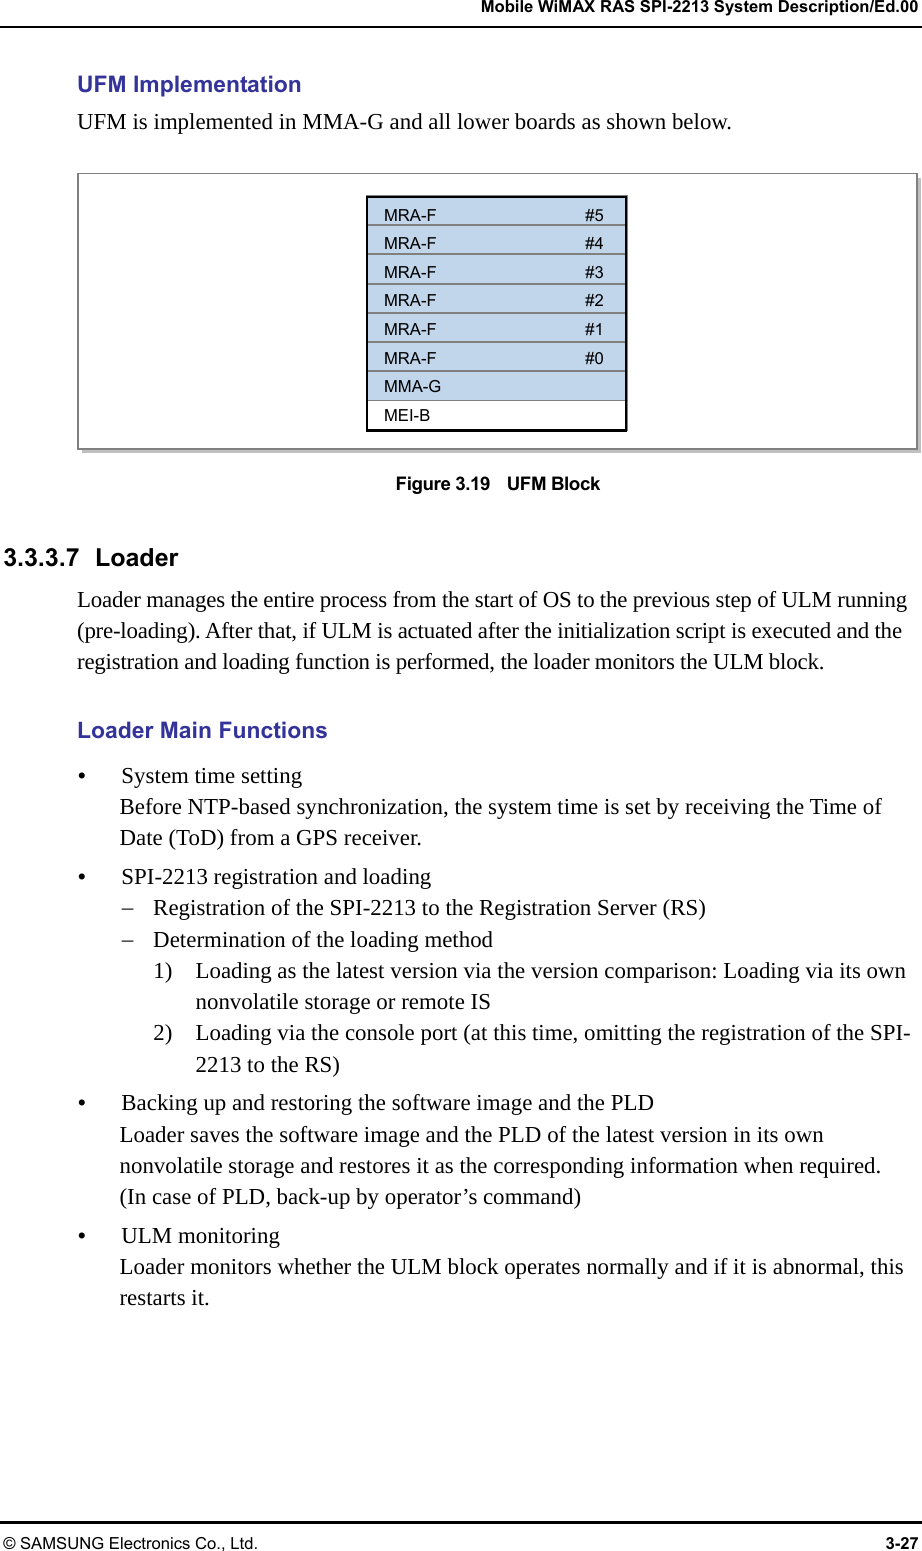   Mobile WiMAX RAS SPI-2213 System Description/Ed.00 © SAMSUNG Electronics Co., Ltd.  3-27 UFM Implementation UFM is implemented in MMA-G and all lower boards as shown below.  Figure 3.19    UFM Block  3.3.3.7 Loader Loader manages the entire process from the start of OS to the previous step of ULM running (pre-loading). After that, if ULM is actuated after the initialization script is executed and the registration and loading function is performed, the loader monitors the ULM block.  Loader Main Functions y System time setting Before NTP-based synchronization, the system time is set by receiving the Time of Date (ToD) from a GPS receiver. y SPI-2213 registration and loading − Registration of the SPI-2213 to the Registration Server (RS) − Determination of the loading method 1)    Loading as the latest version via the version comparison: Loading via its own nonvolatile storage or remote IS 2)    Loading via the console port (at this time, omitting the registration of the SPI-2213 to the RS) y Backing up and restoring the software image and the PLD Loader saves the software image and the PLD of the latest version in its own nonvolatile storage and restores it as the corresponding information when required. (In case of PLD, back-up by operator’s command) y ULM monitoring Loader monitors whether the ULM block operates normally and if it is abnormal, this restarts it.  MRA-F #5 MRA-F #4 MRA-F #3 MRA-F #2 MRA-F #1 MRA-F #0 MMA-G MEI-B 